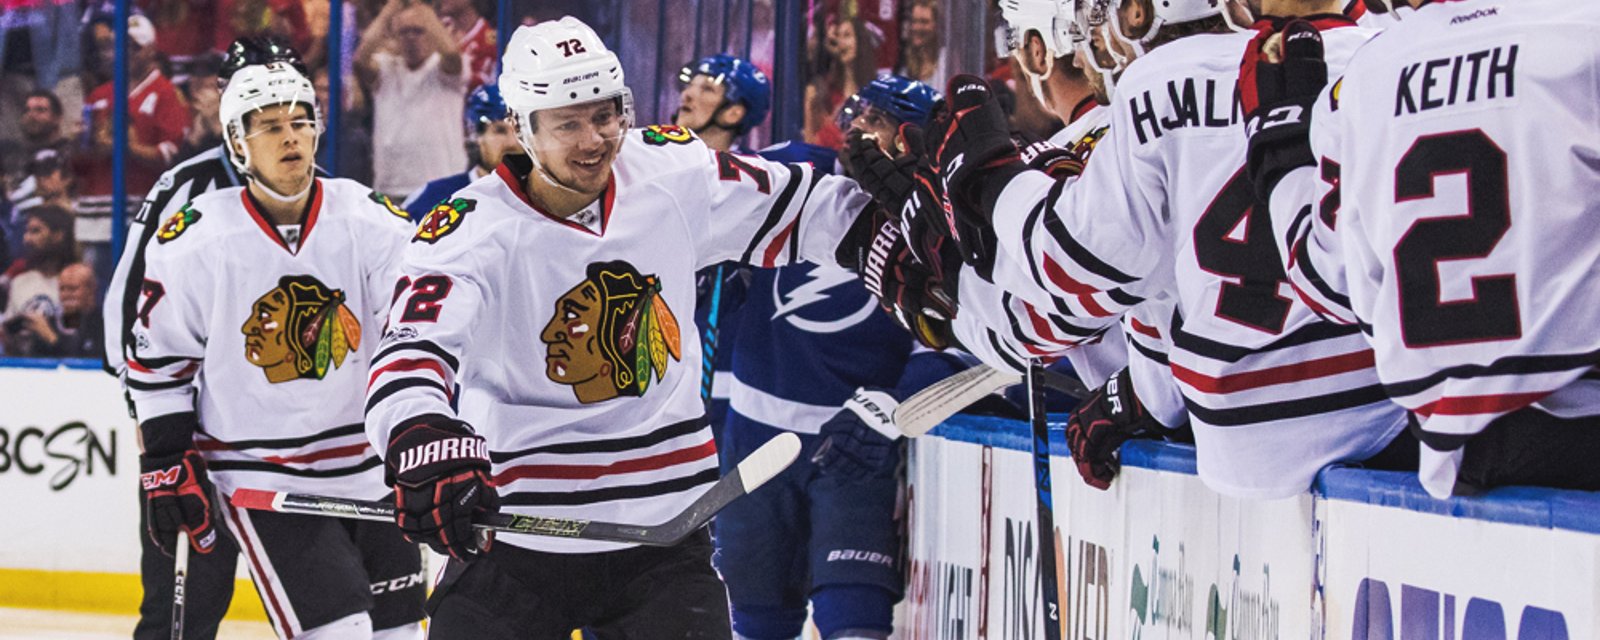 Rumor: The Montreal Canadiens are inquiring about Hawks core players.